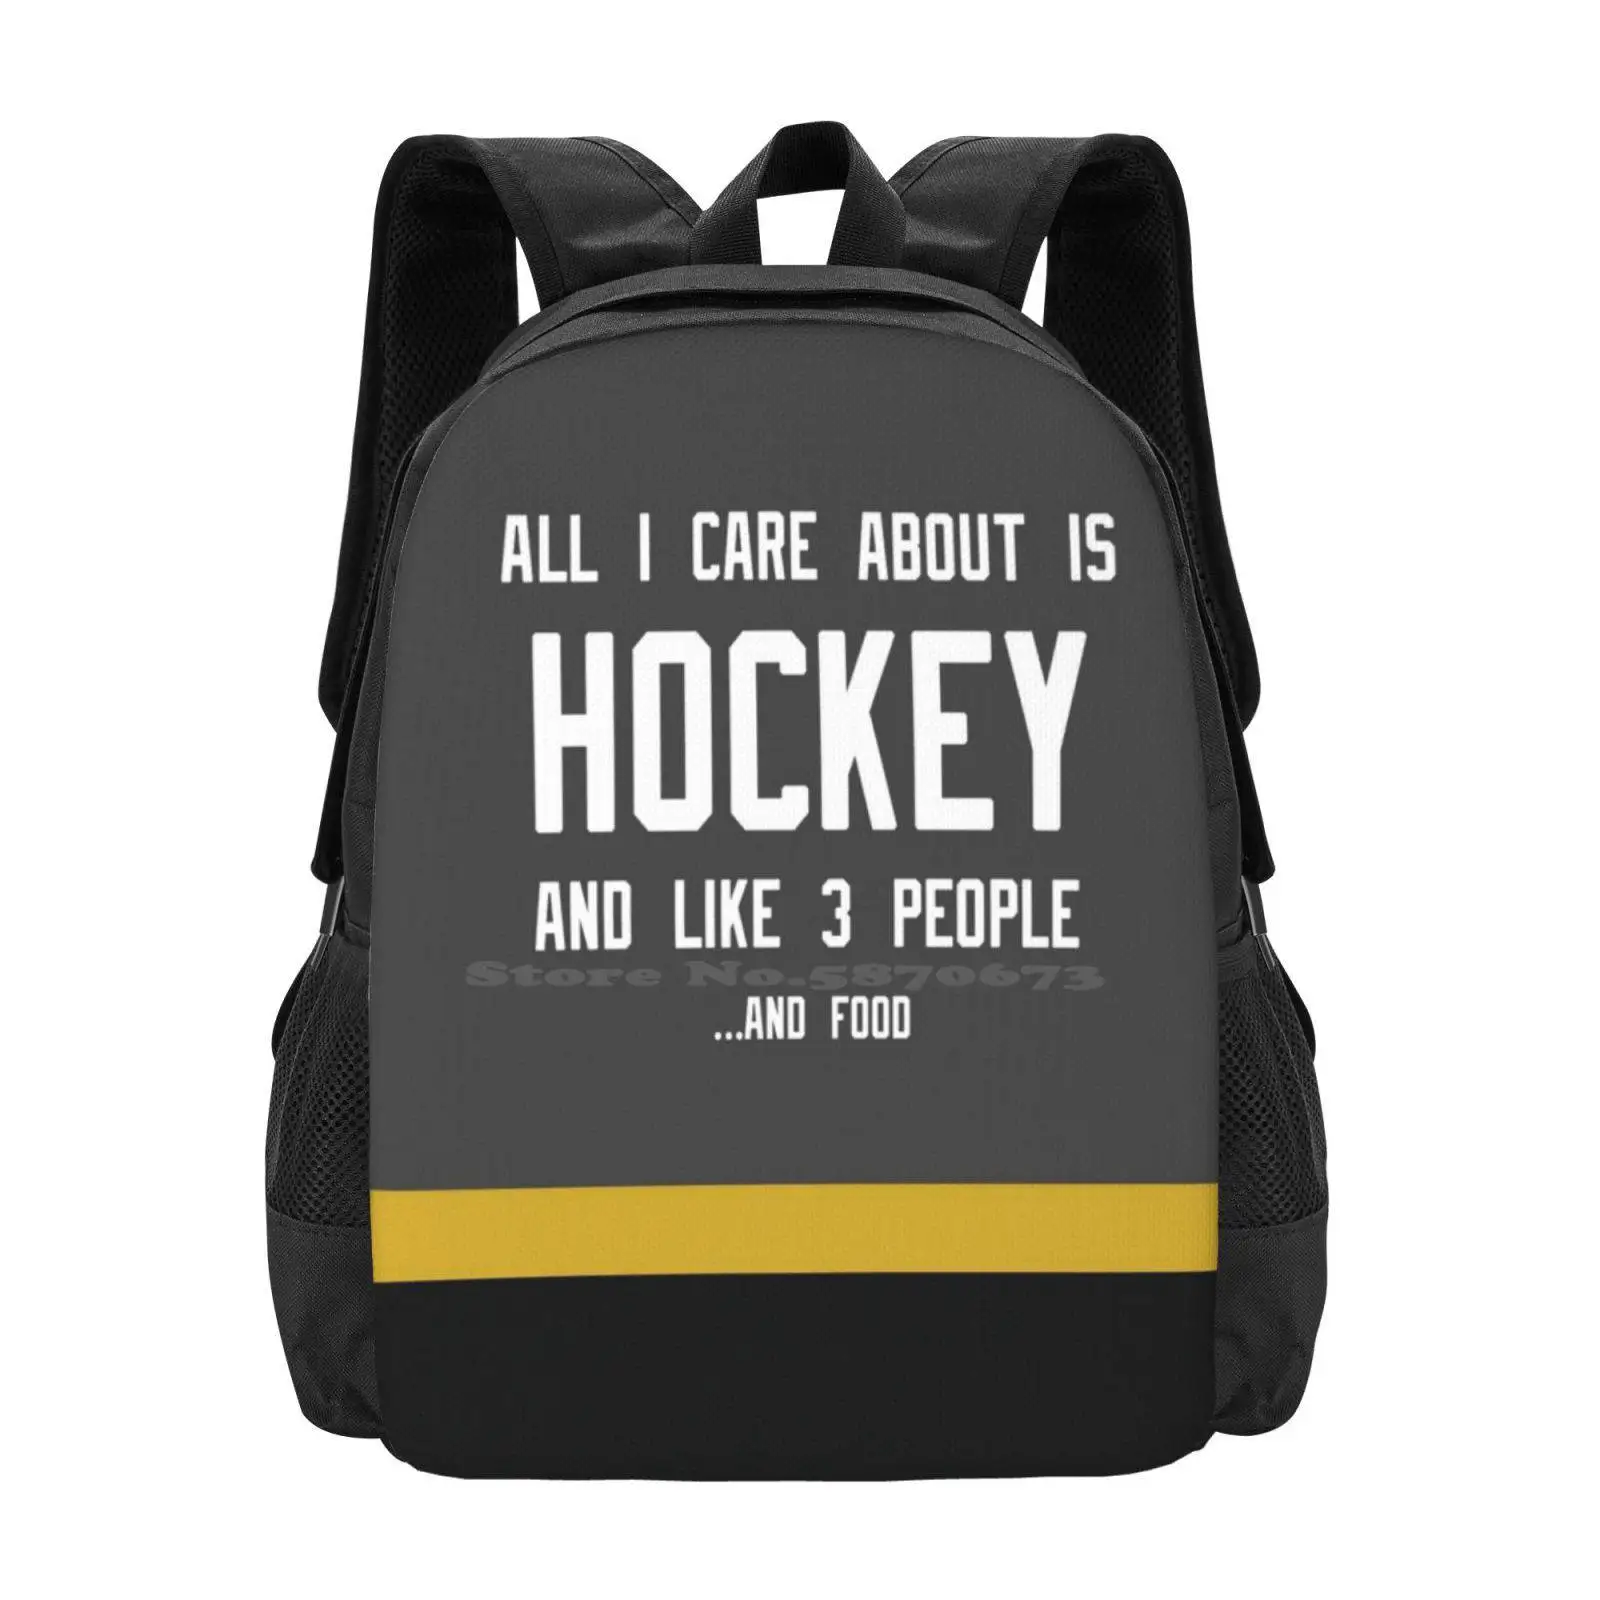 

All I Care About Is Hockey-Vegas Fashion Pattern Design Travel Laptop School Backpack Bag Vegas Golden Knights Hockey Fleury